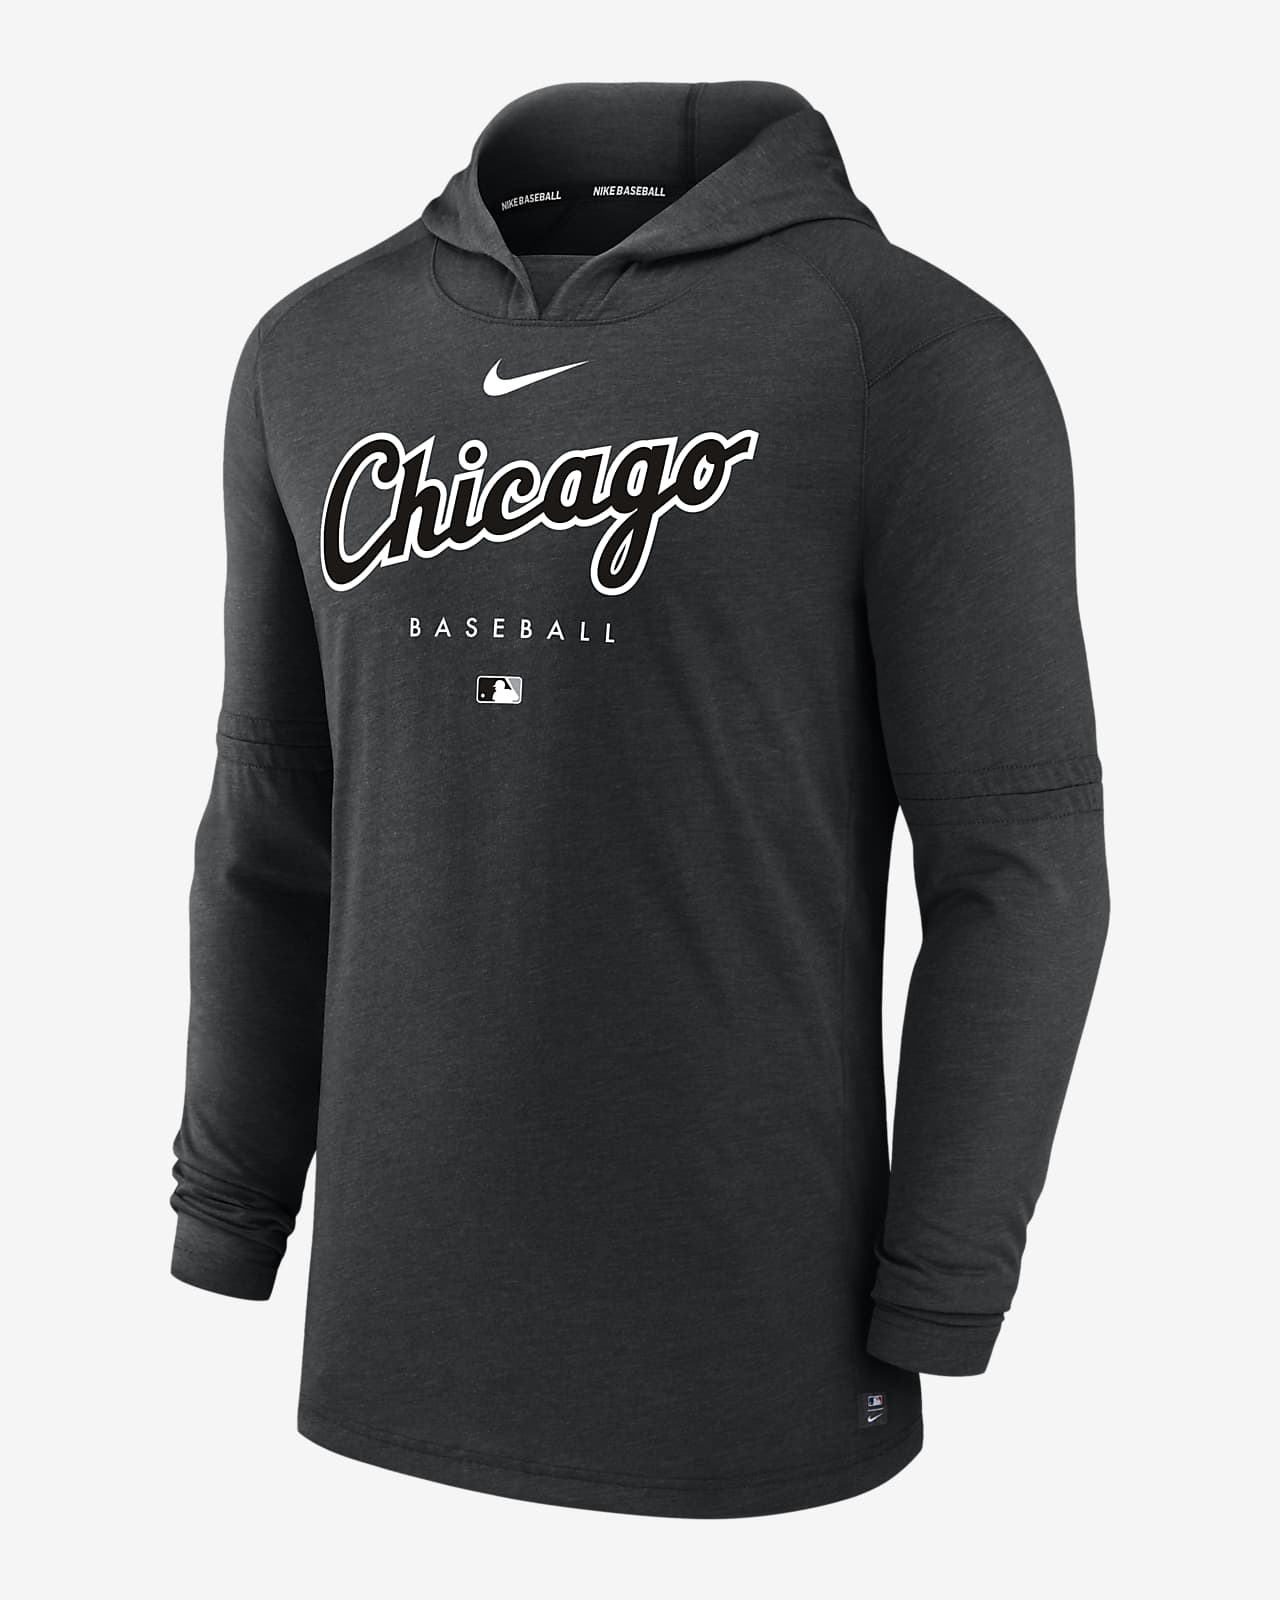 Nike Dri-FIT Early Work (MLB Chicago White Sox) Men's Pullover Hoodie.